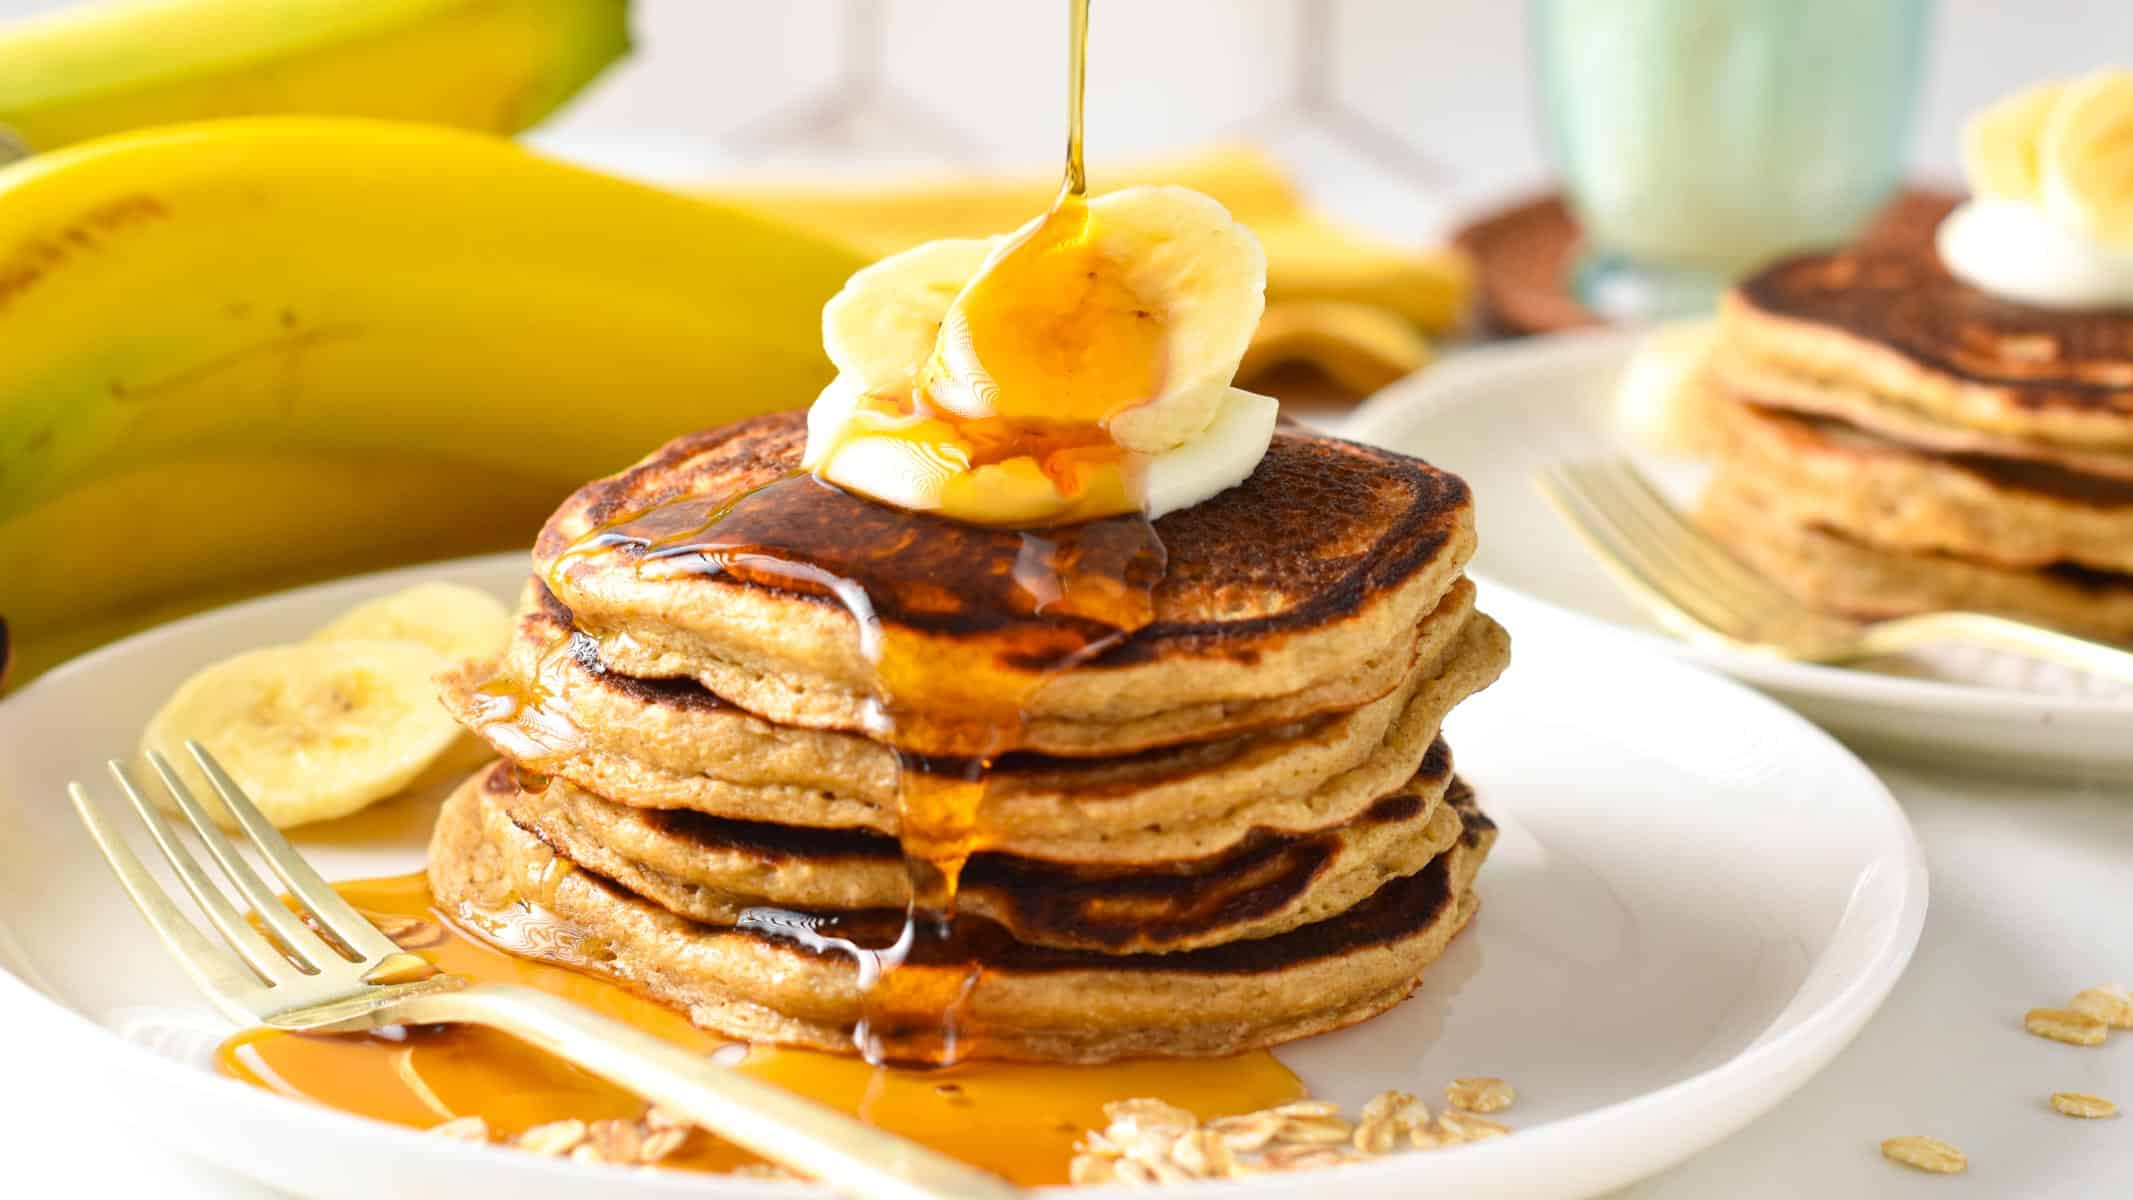 These Cottage Cheese Banana Pancakes are delicious high-protein banana pancakes made from the blended cottage, with no protein powder needed